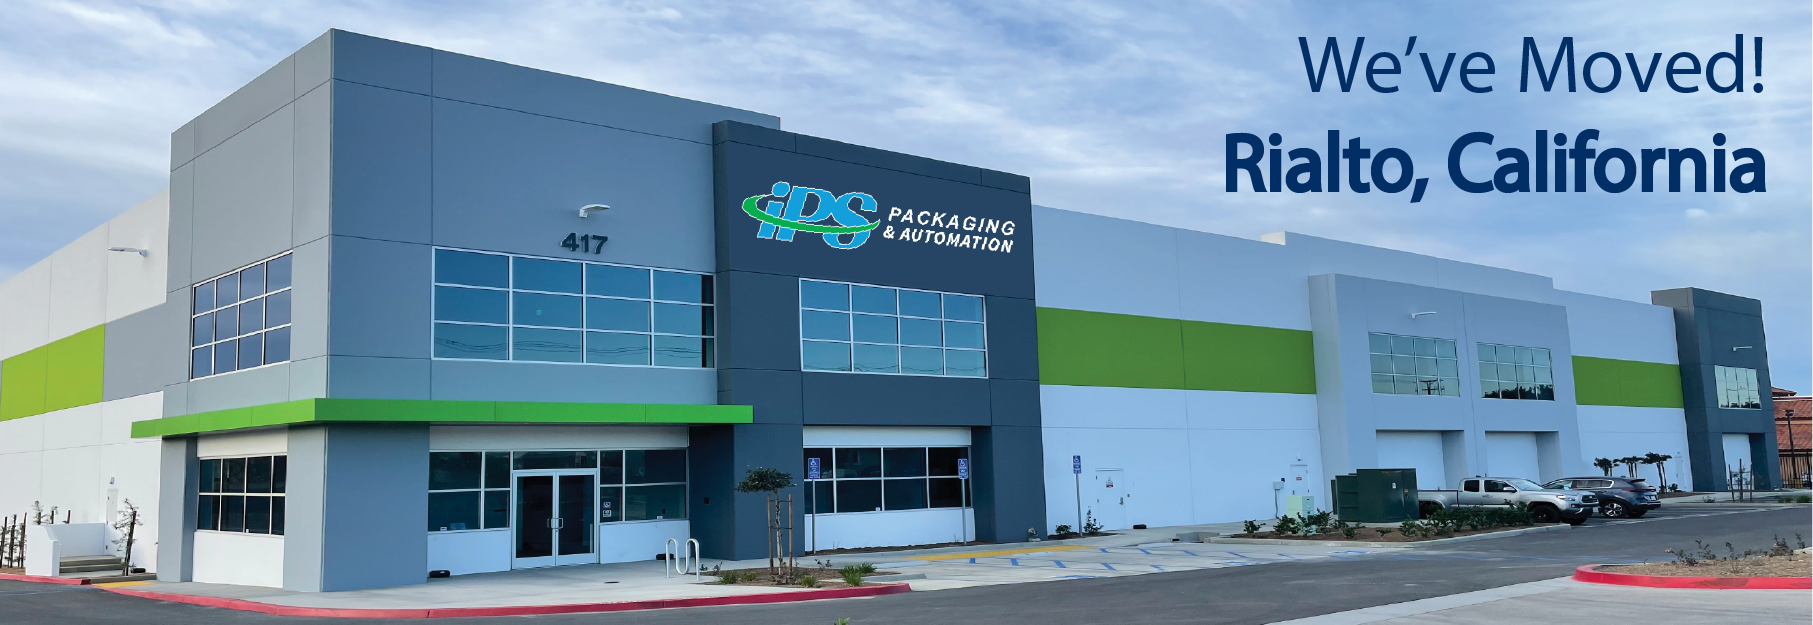 Press Release: IPS Packaging & Automation Opens Rialto, CA Location